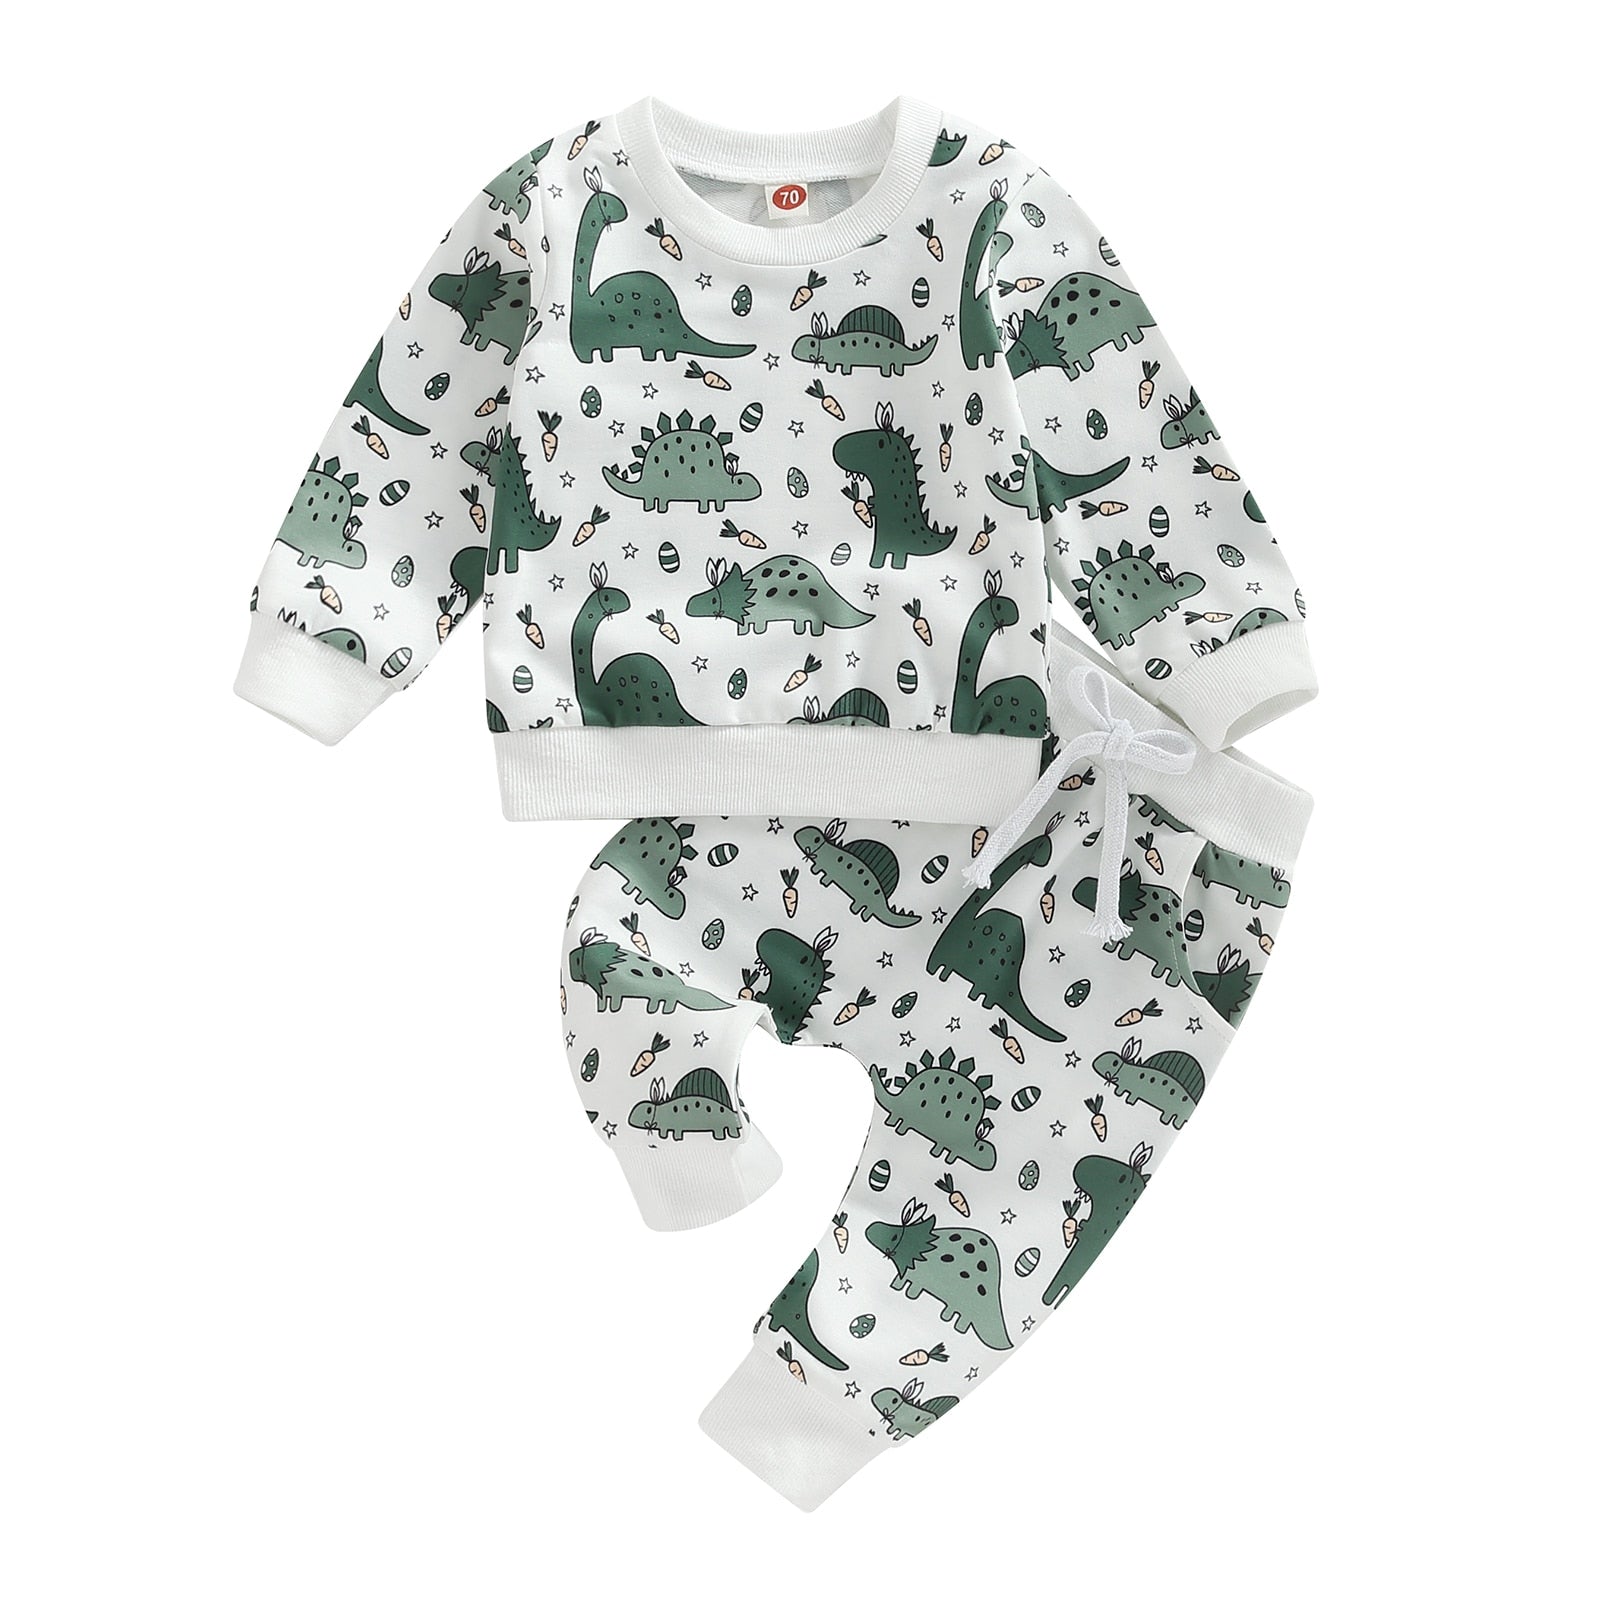 Dress Up Your Little Ones in Style with Spring Baby Clothes Sets